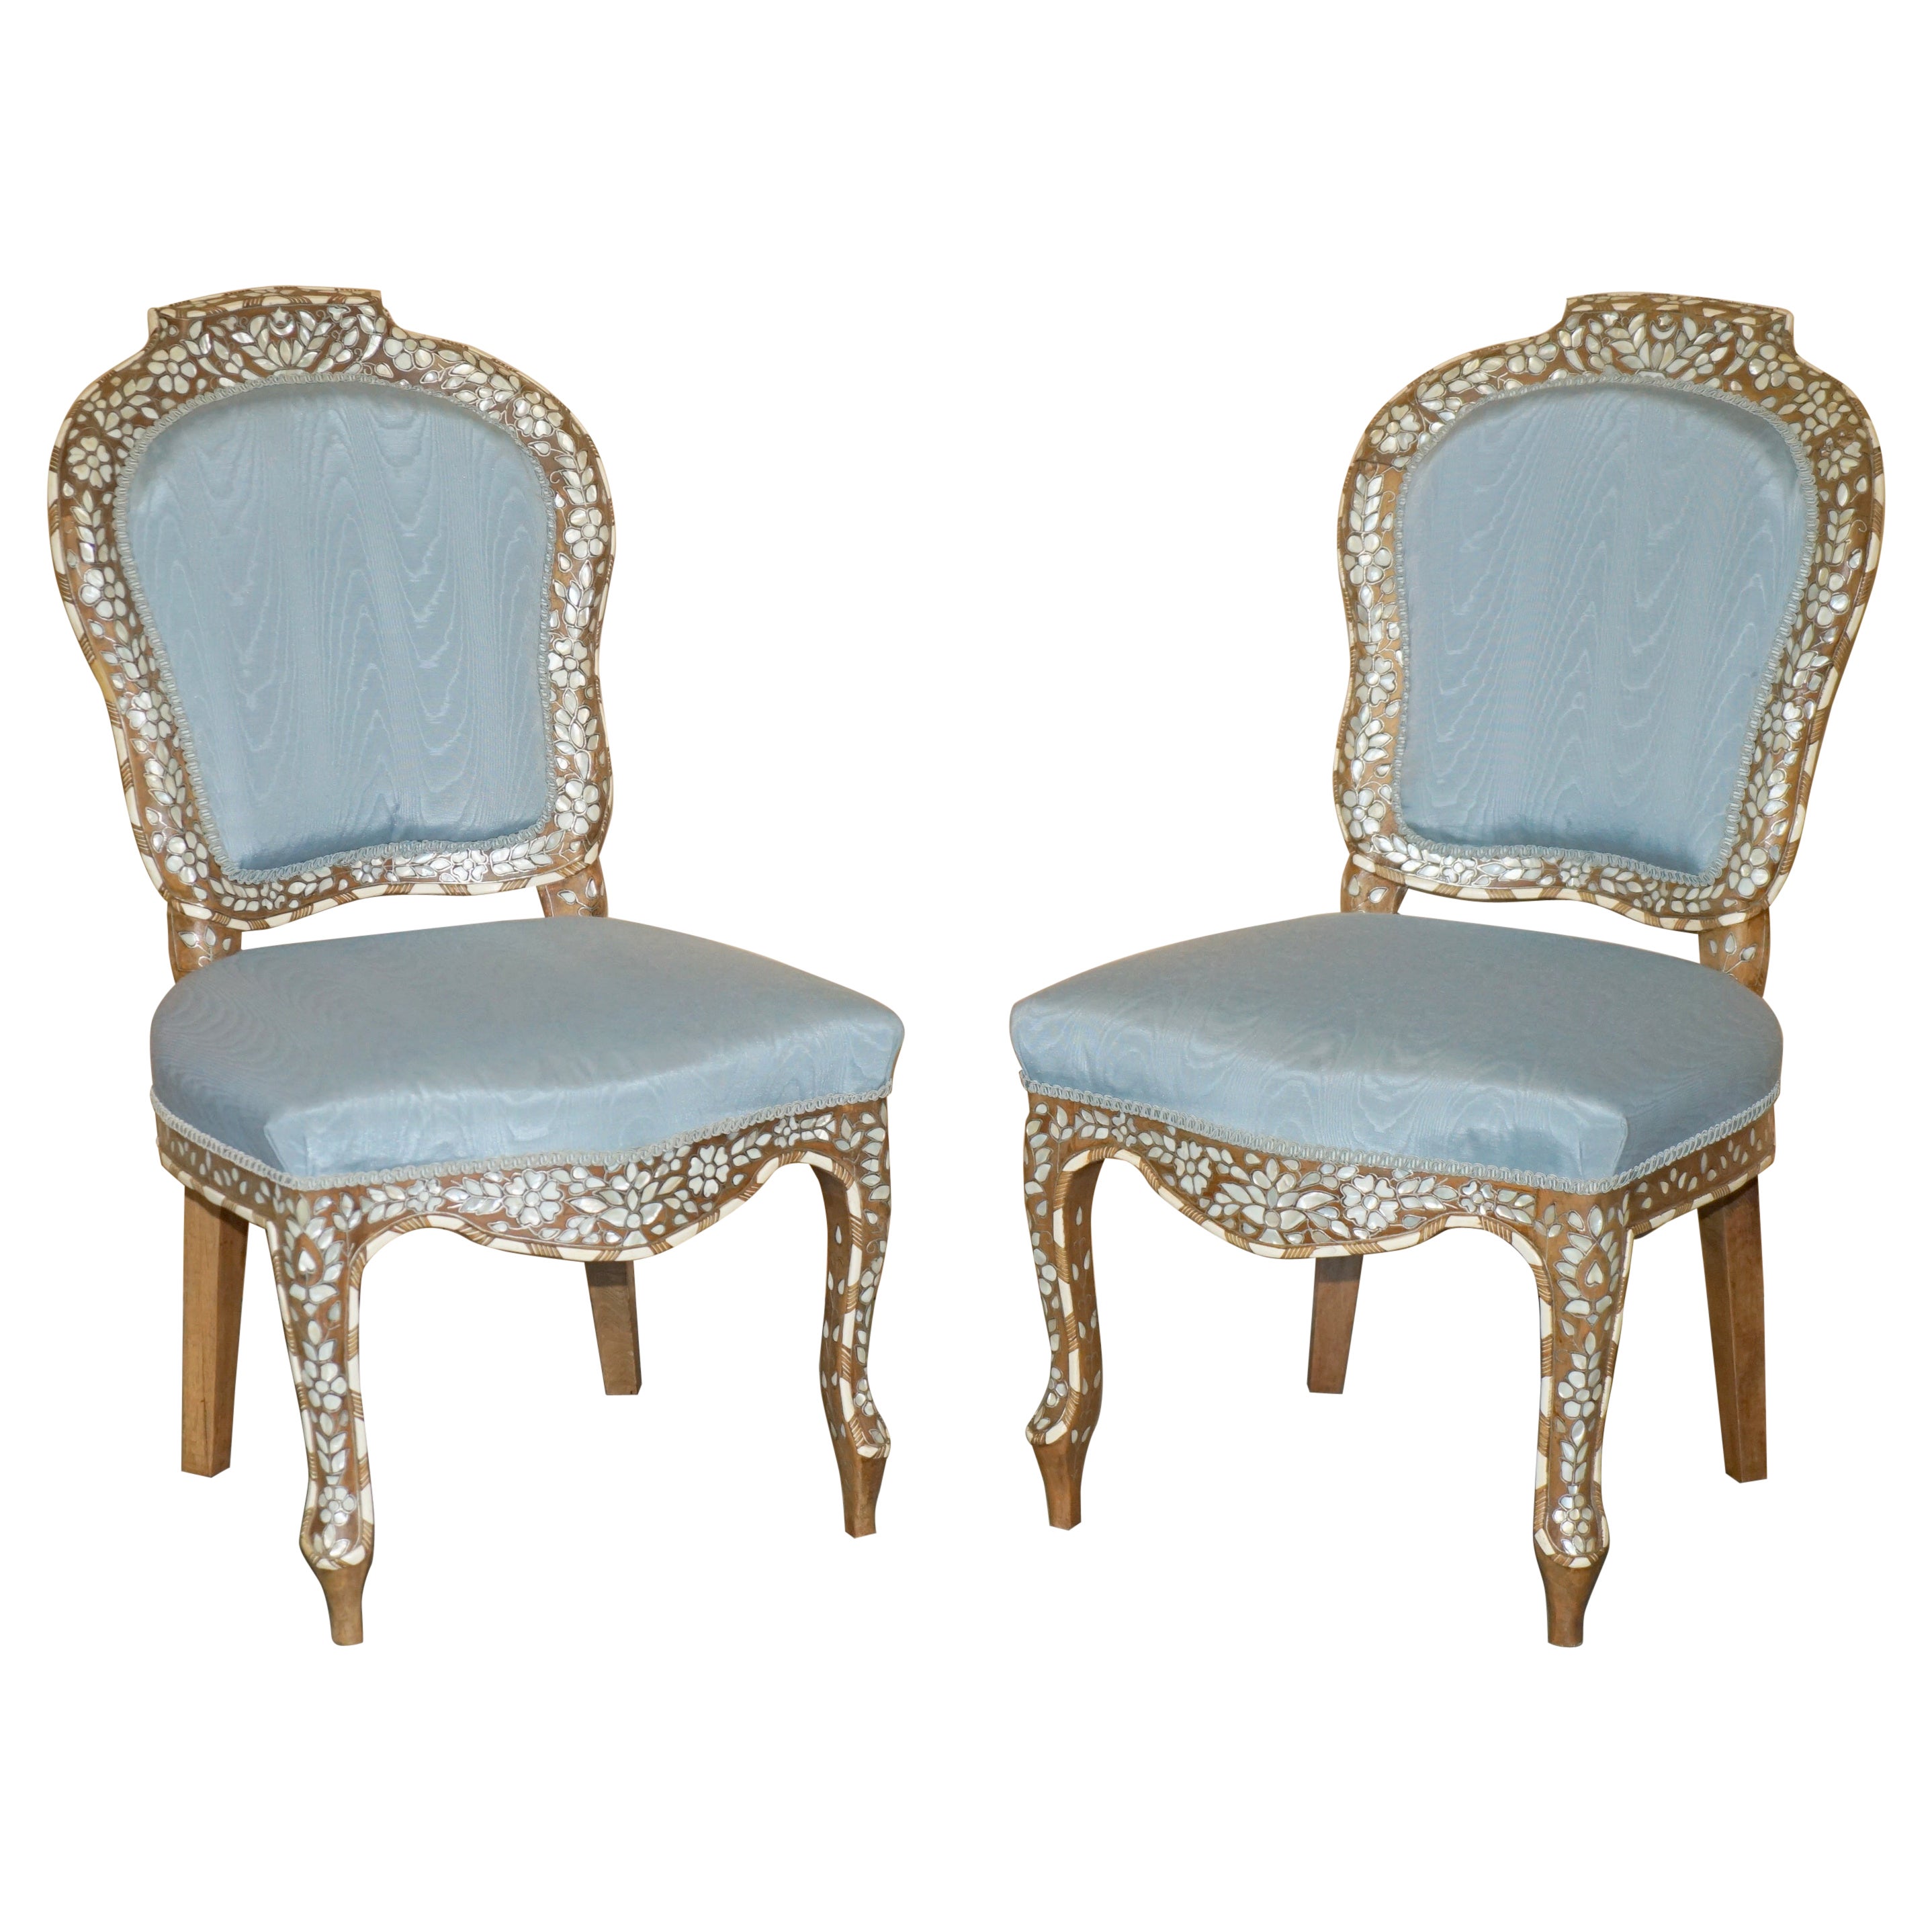 SUBLiME PAIR OF ANTIQUE MOTHER OF PEARL INLAID SIDE CHAIRS WITH HARDWOOD FRAMES For Sale